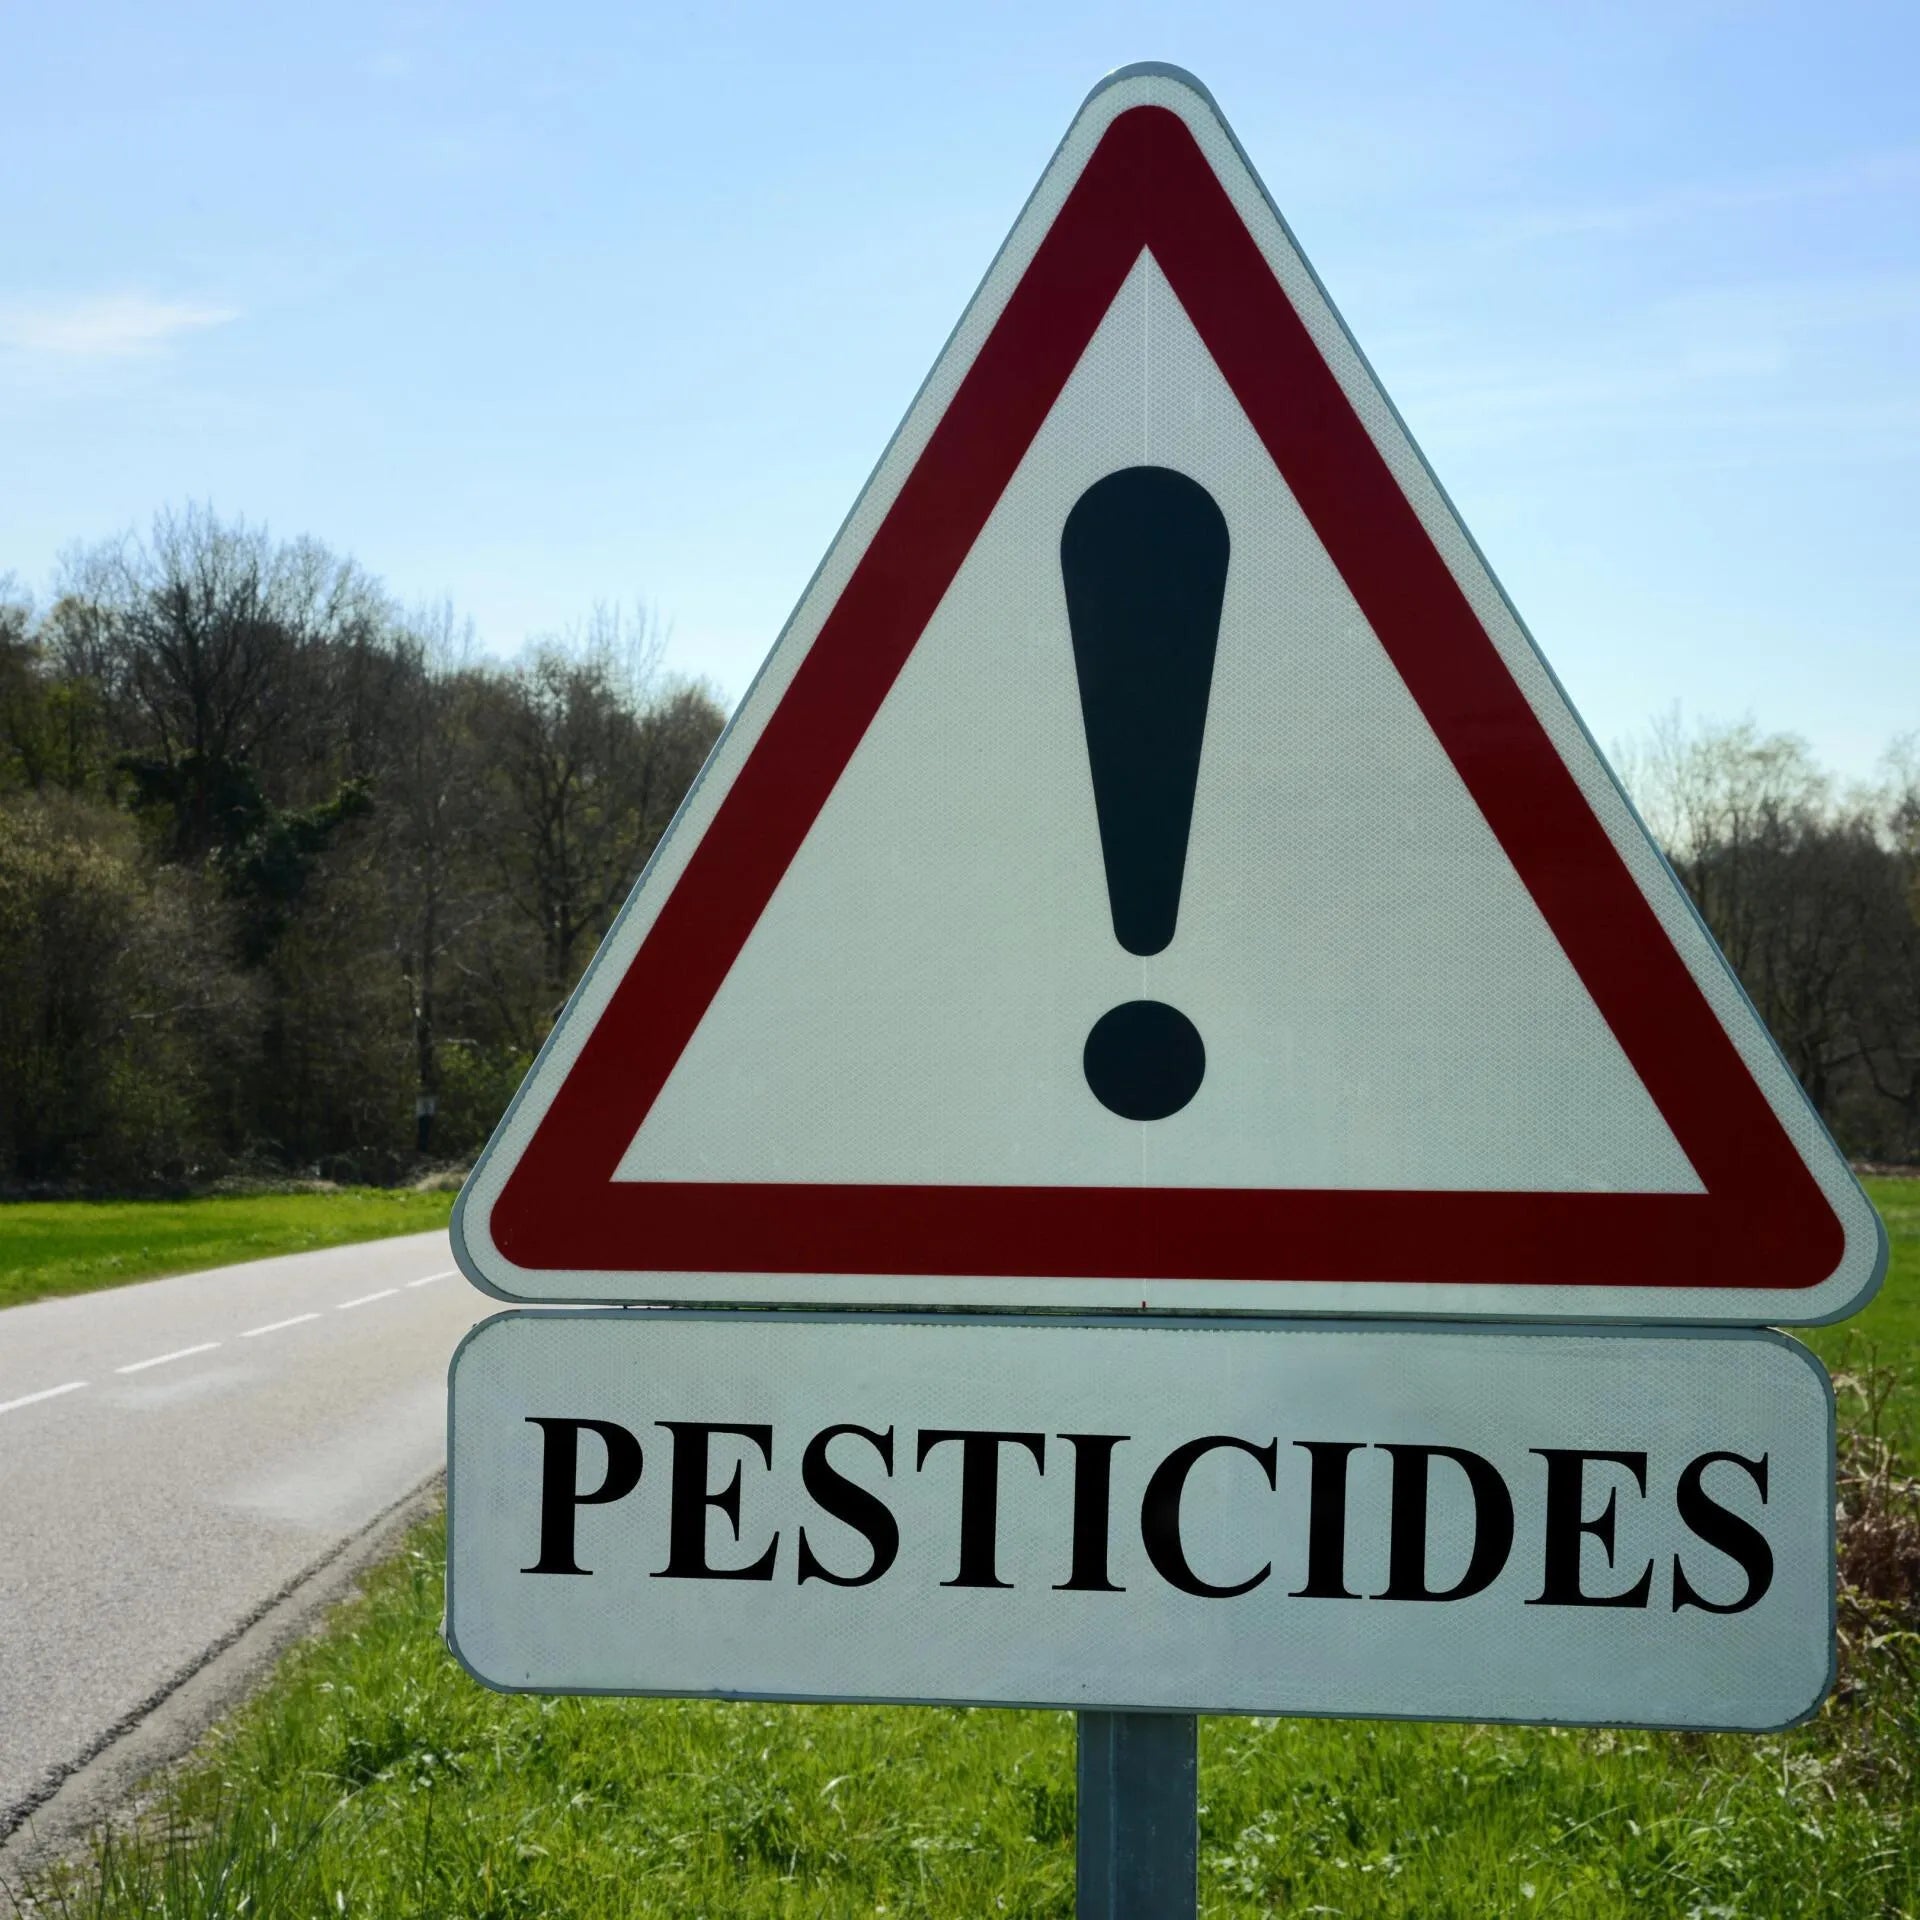 road sign warning pesticides in use